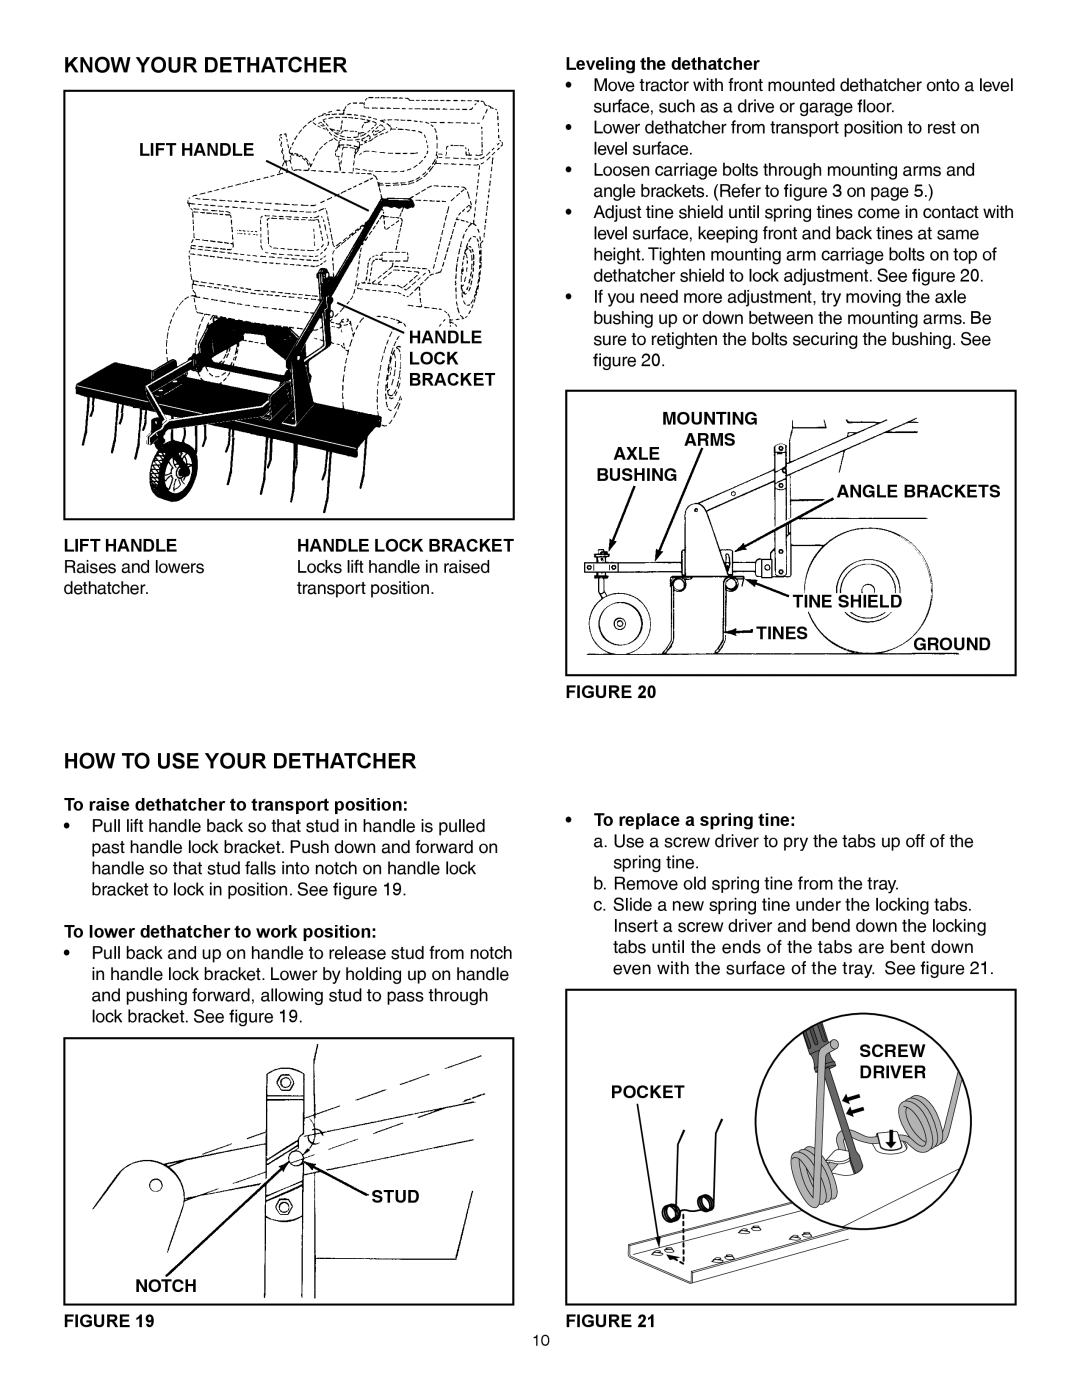 Sears 45-04381 Know Your Dethatcher, How To Use Your Dethatcher, Lift Handle Handle Lock Bracket, Leveling the dethatcher 